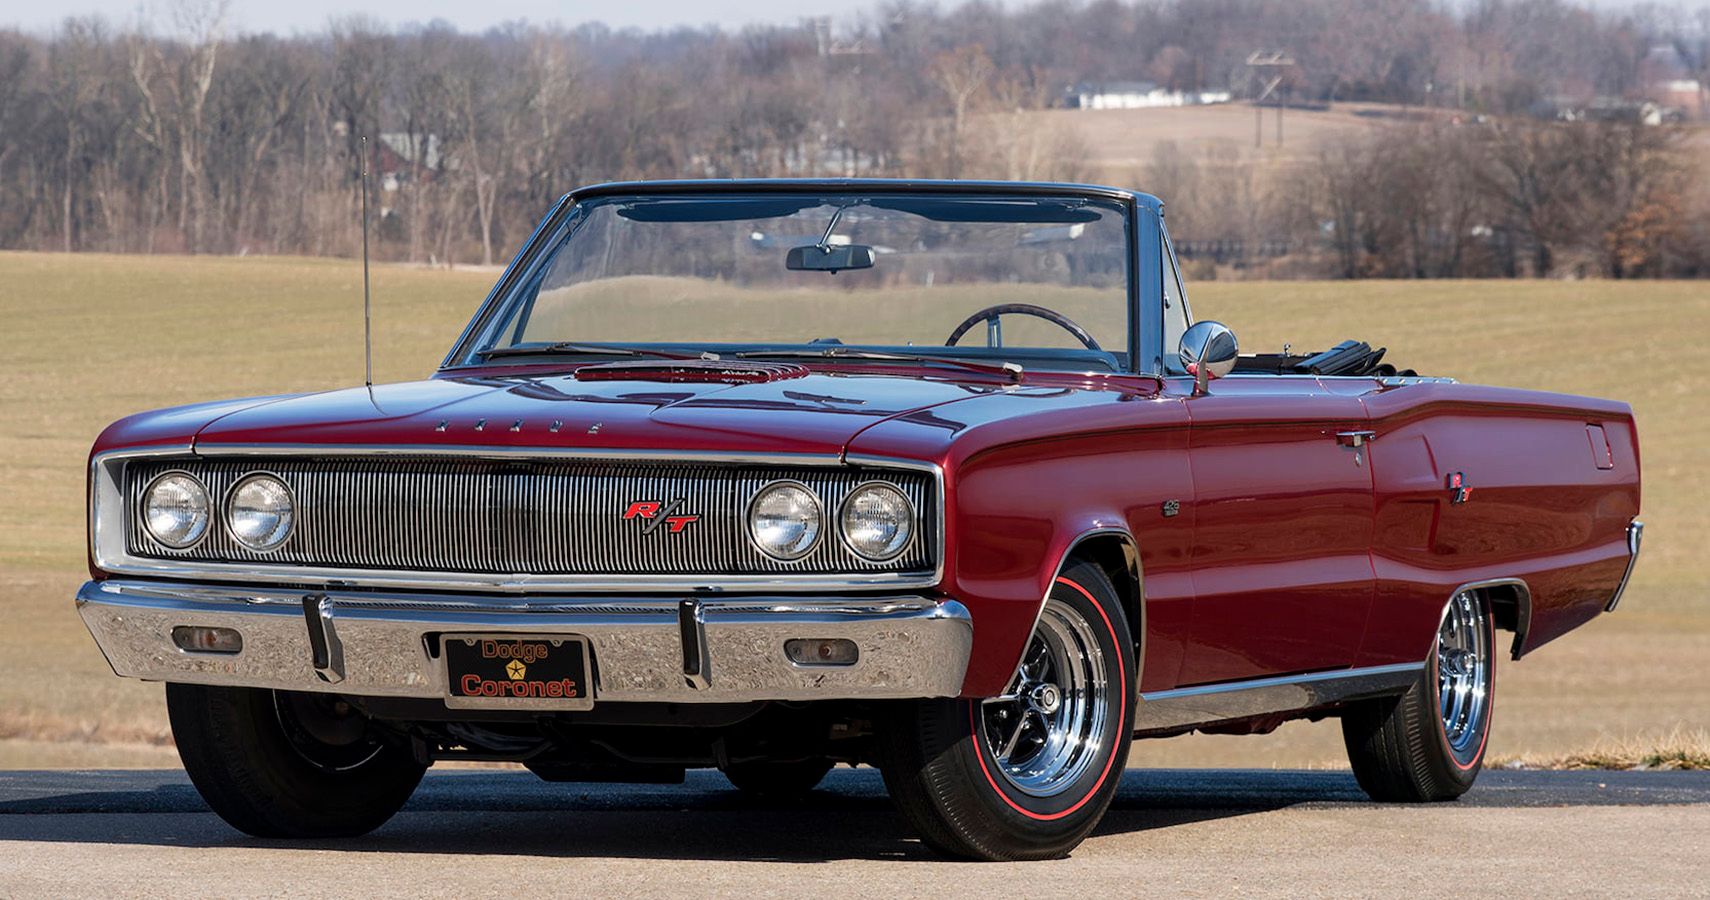 This Is The Best Dodge Coronet To Buy And Collect